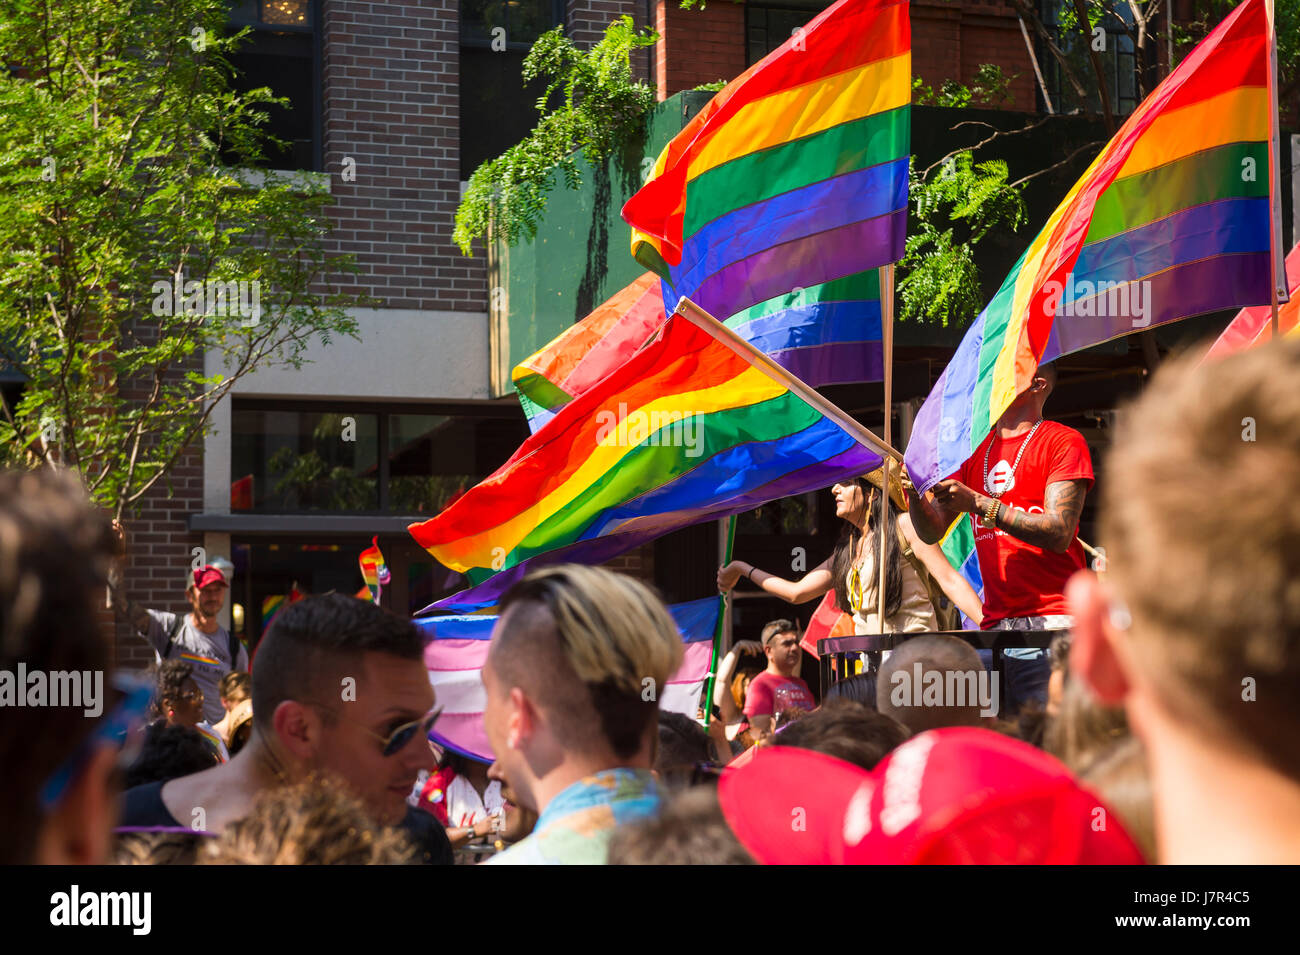 NEW YORK CITY - JUNE 26, 2015: Supporters wave rainbows flags on the sidelines of the annual Pride Parade in the famously tolerant Greenwich Village. Stock Photo